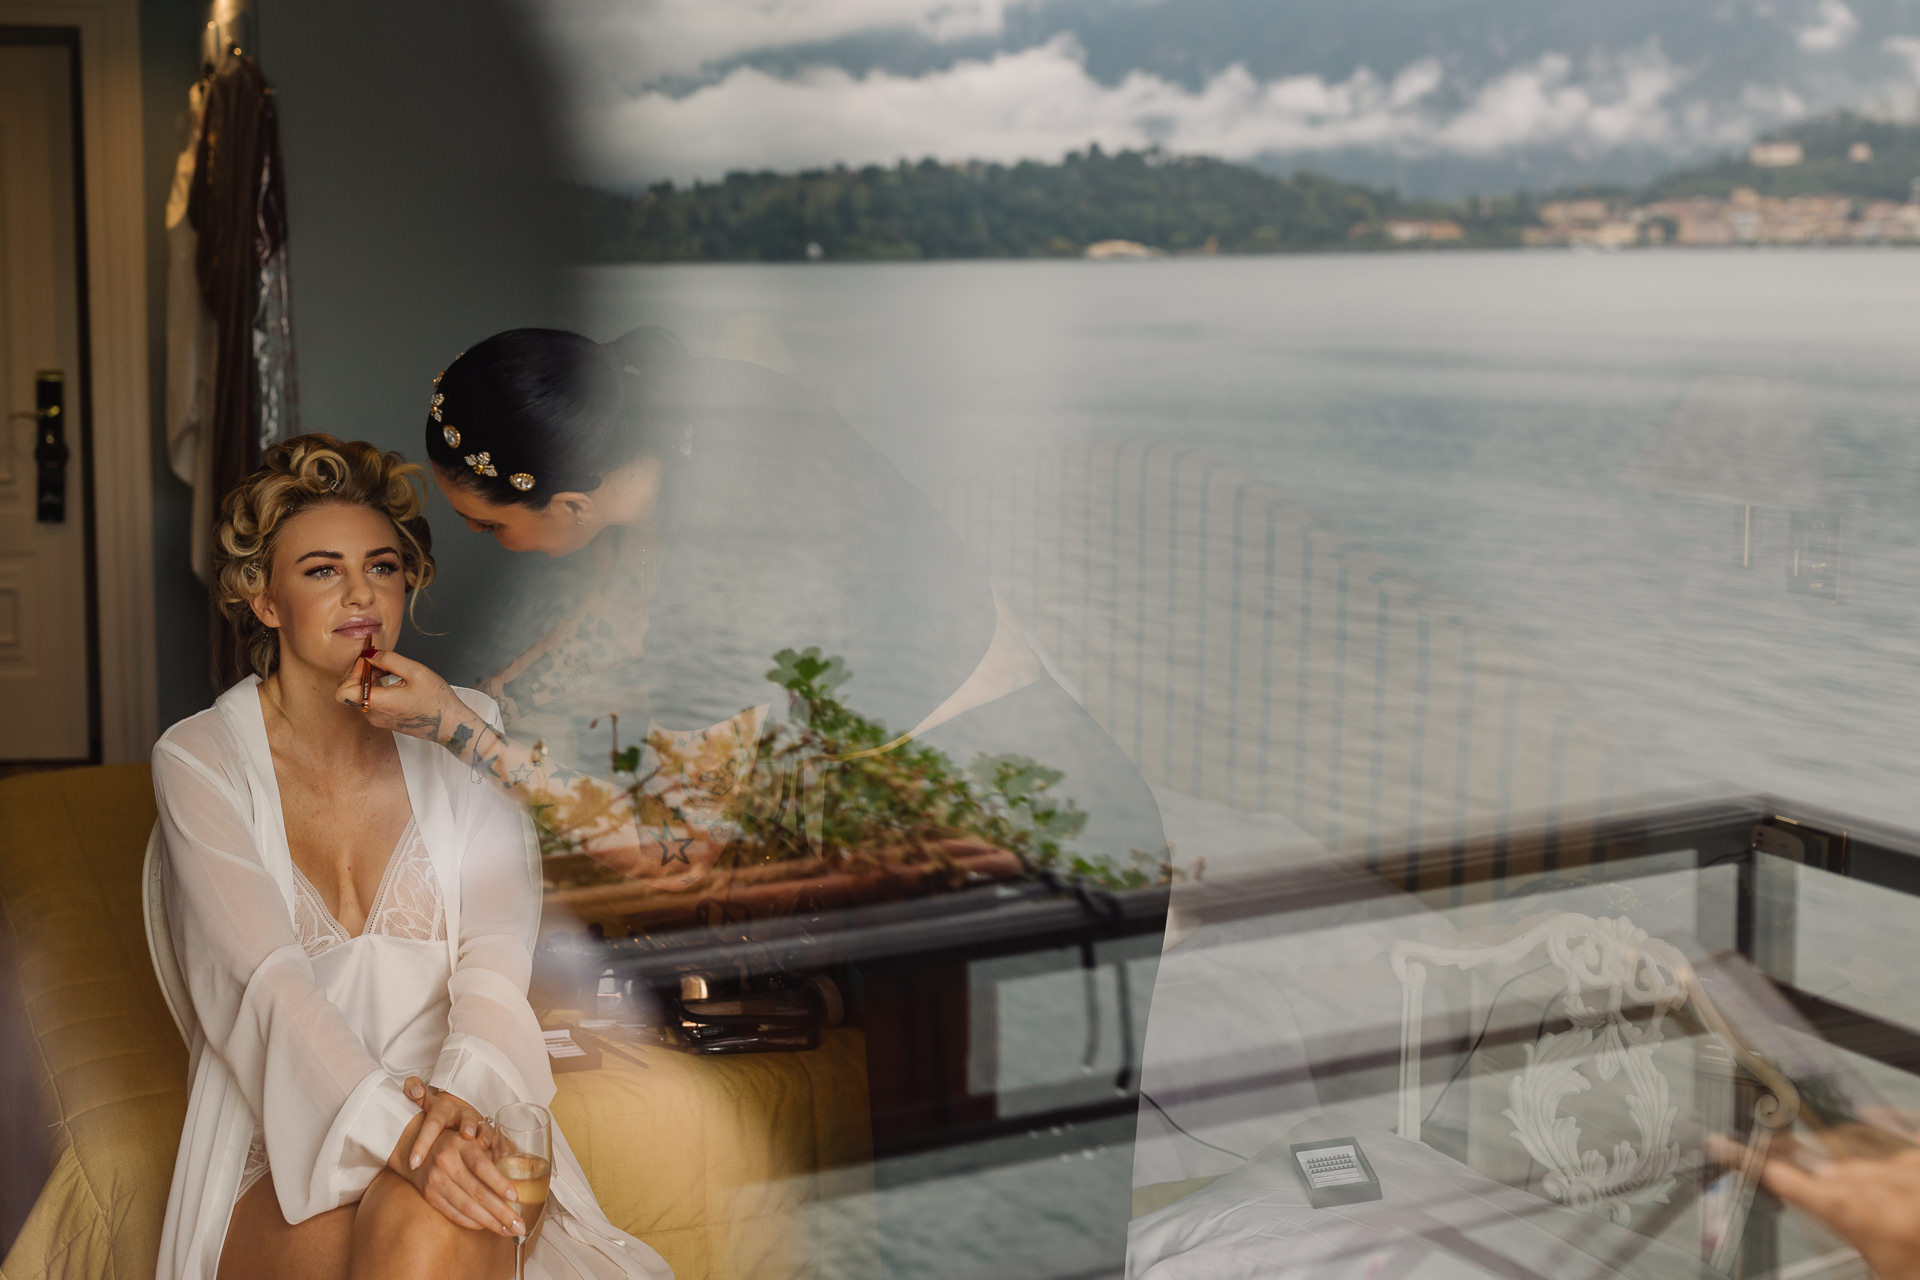 Lake Como Wedding Photography at Villa Balbianello | The bride is Looking serene and poised